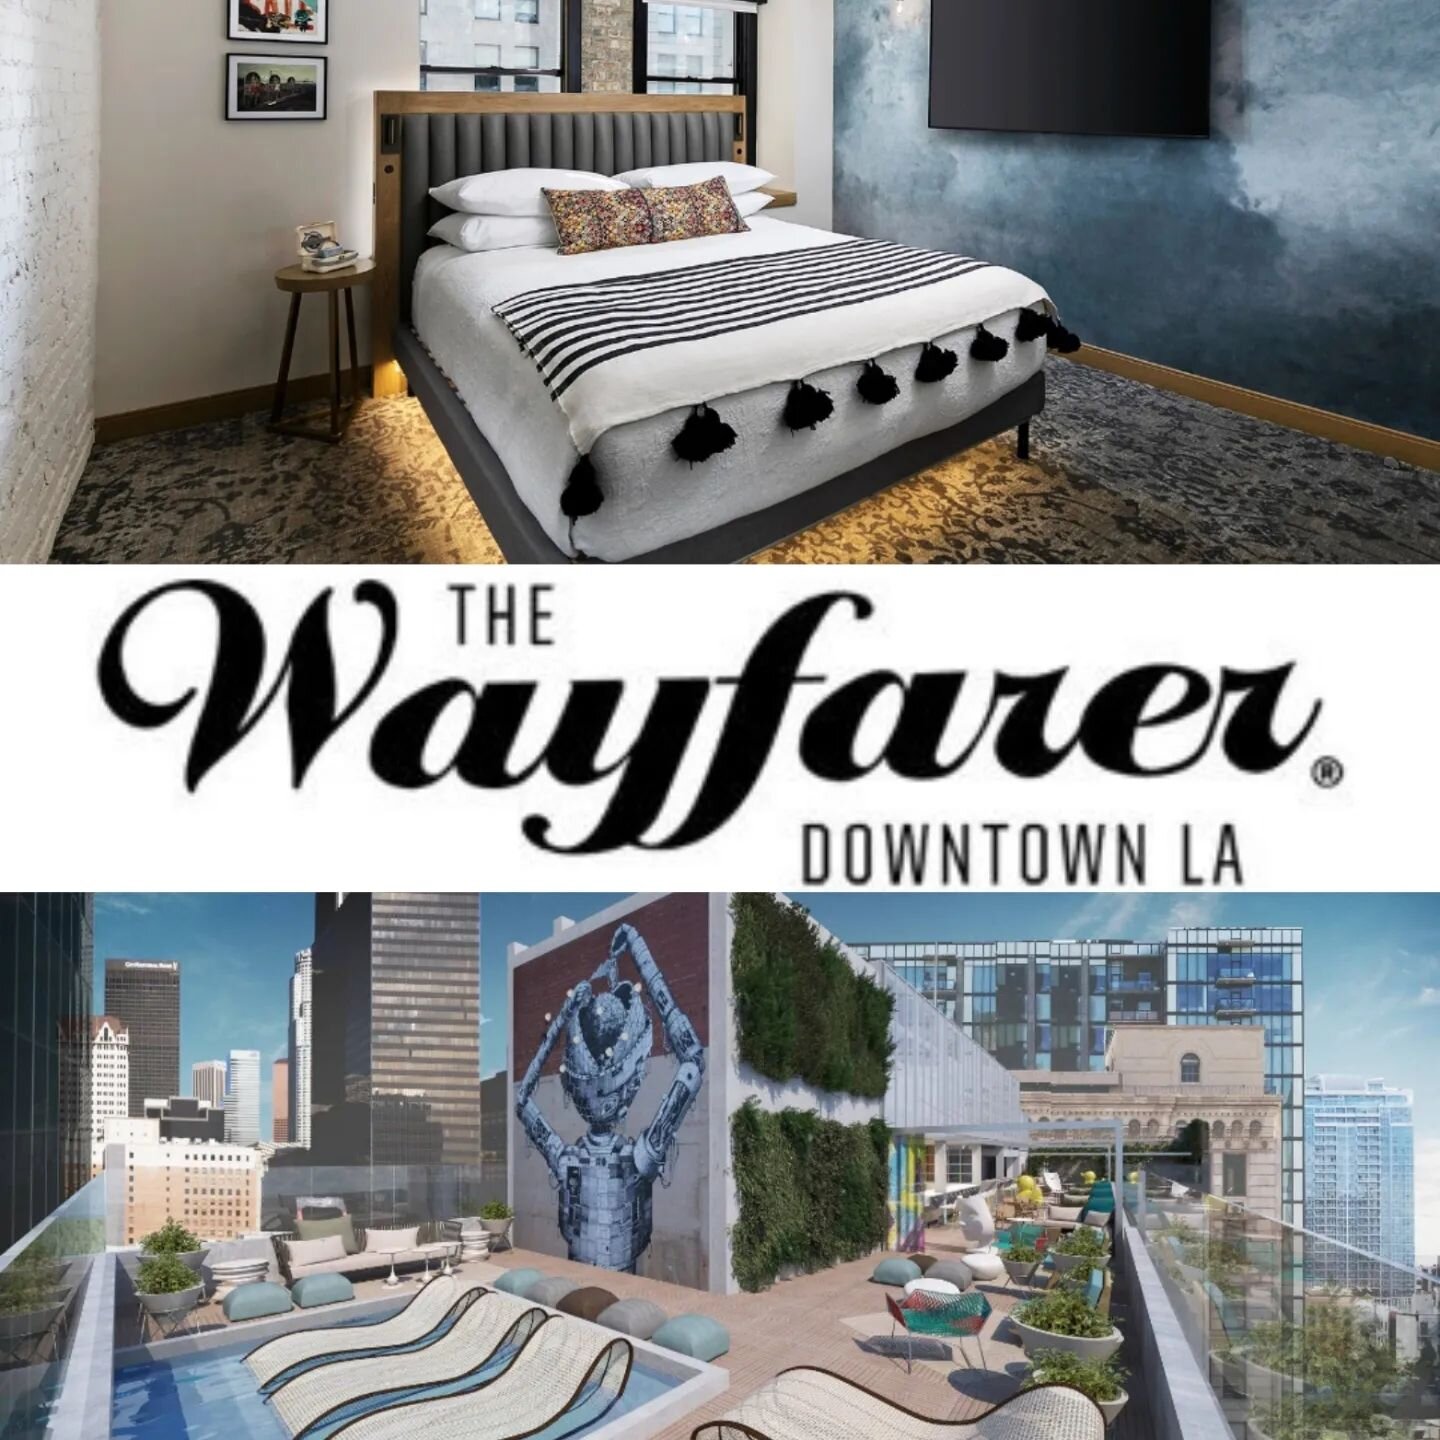 Shout-out to the wonderful, Sean Farry from @oilchef4u ! Glad to be working with you again! Another special shout-out to Bruno over at @thewayfarerdtla for the hospitality! 

#losangeles #lakers #california #hotellife #travelawesome #travelgoals #tra